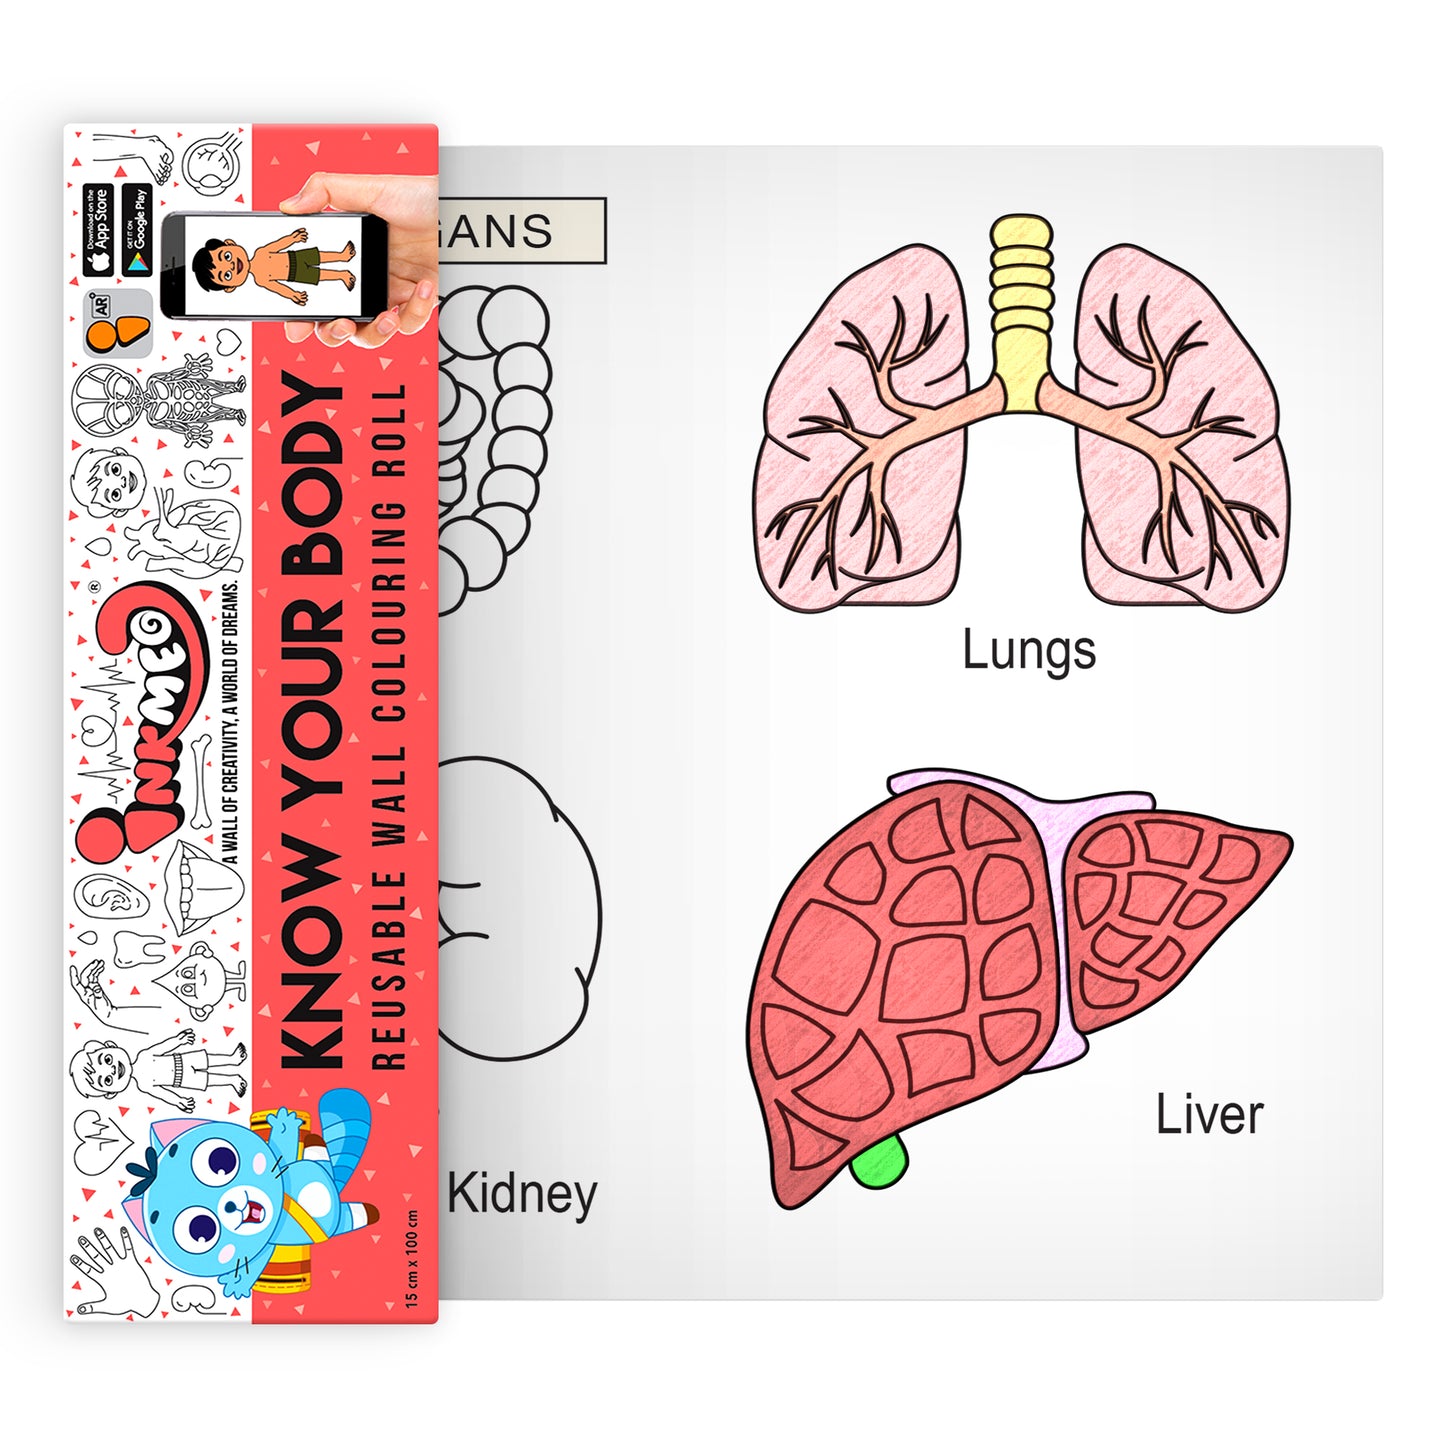 Know your Body Reusable Wall Colouring Roll - Augmented Reality Learning (6 Inches)